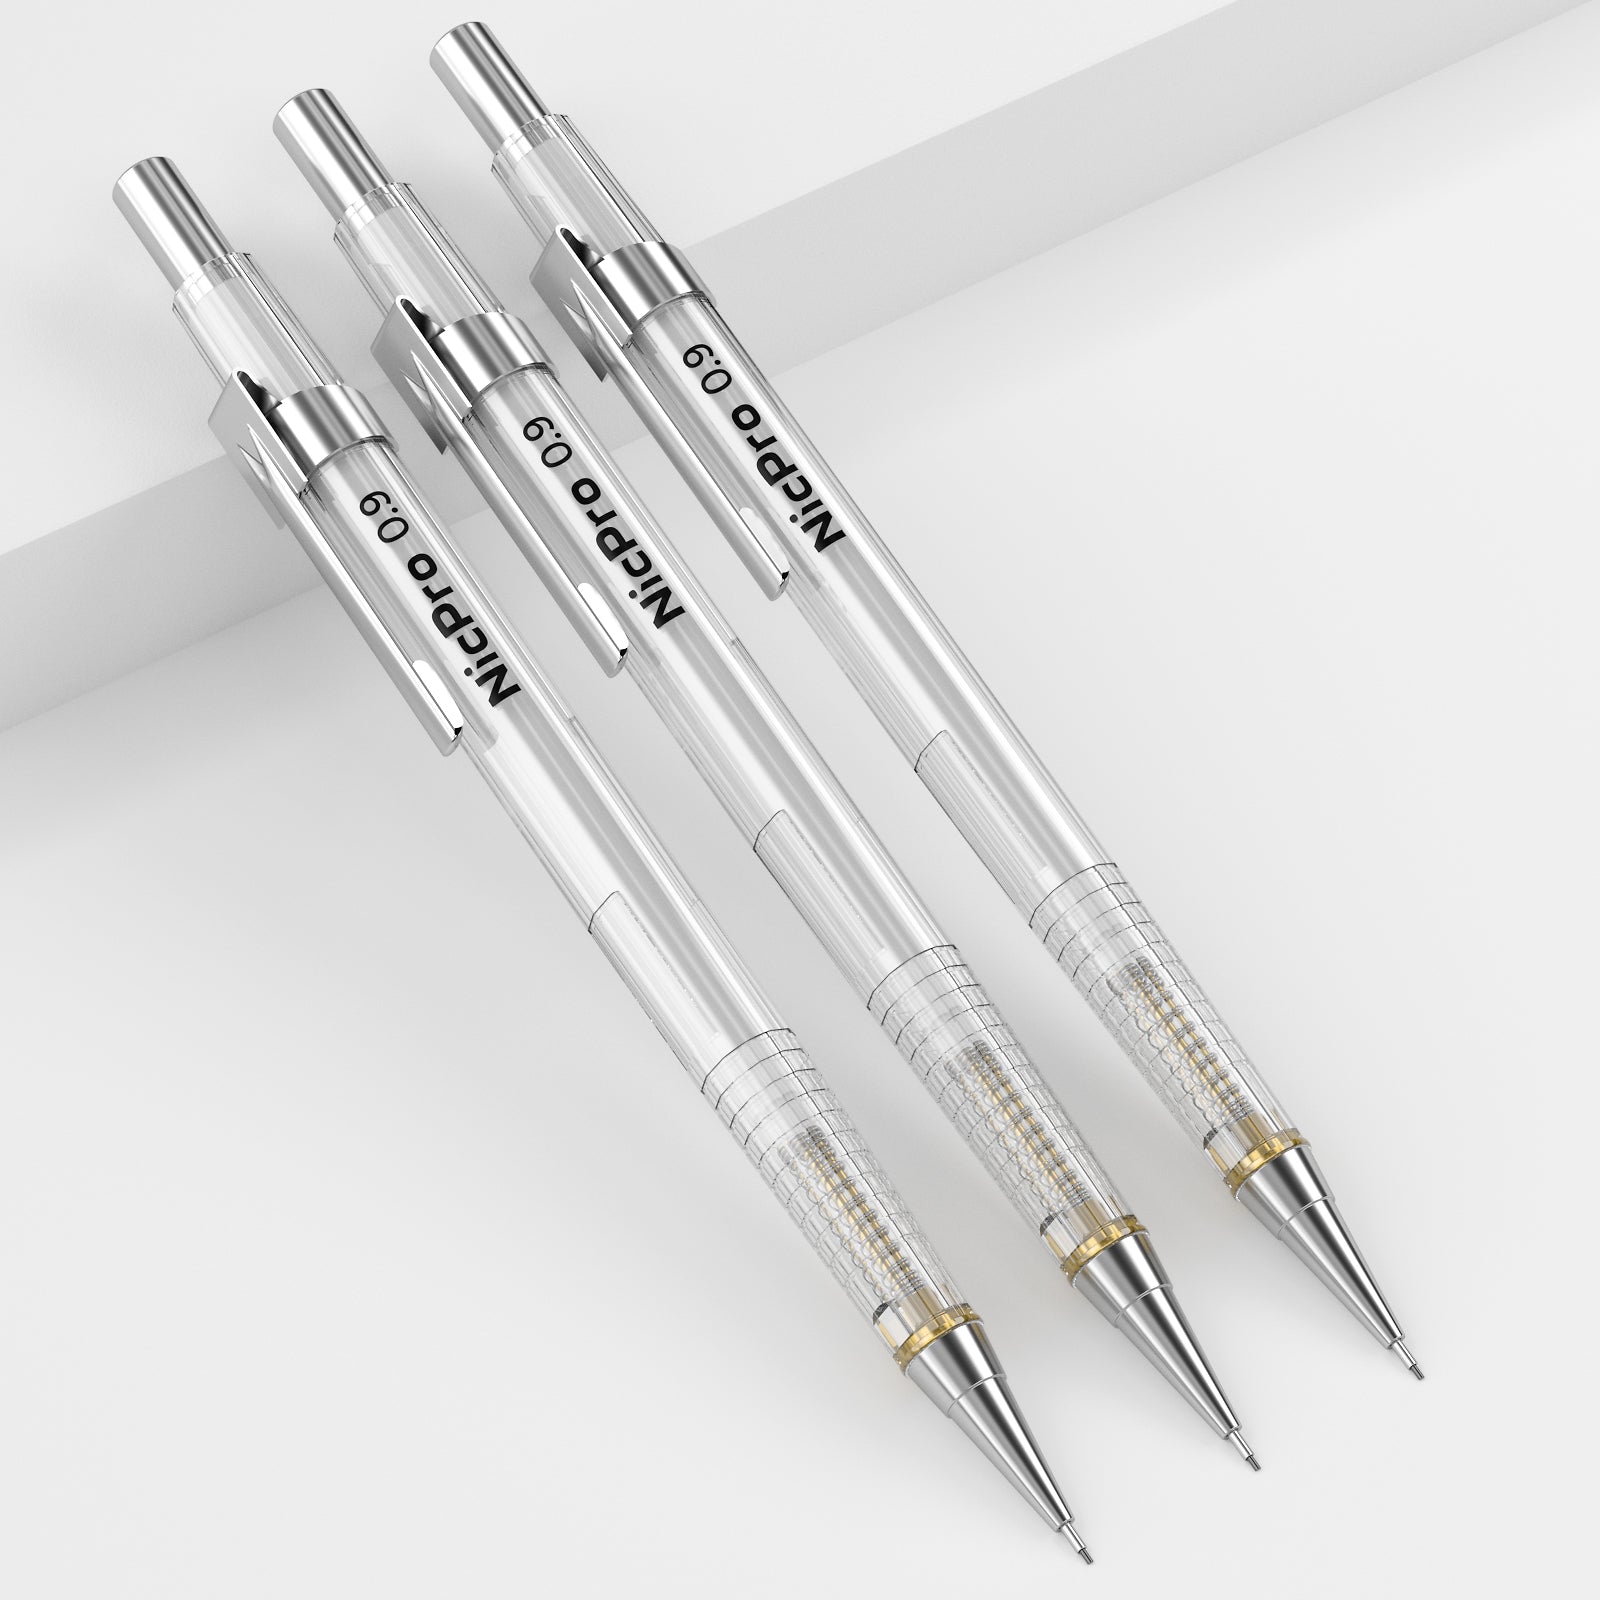 Essential Mechanical Pencil Set - 4 Sizes: 0.3, 0.5, 0.7 & 0.9mm with HB Lead & Eraser Refills